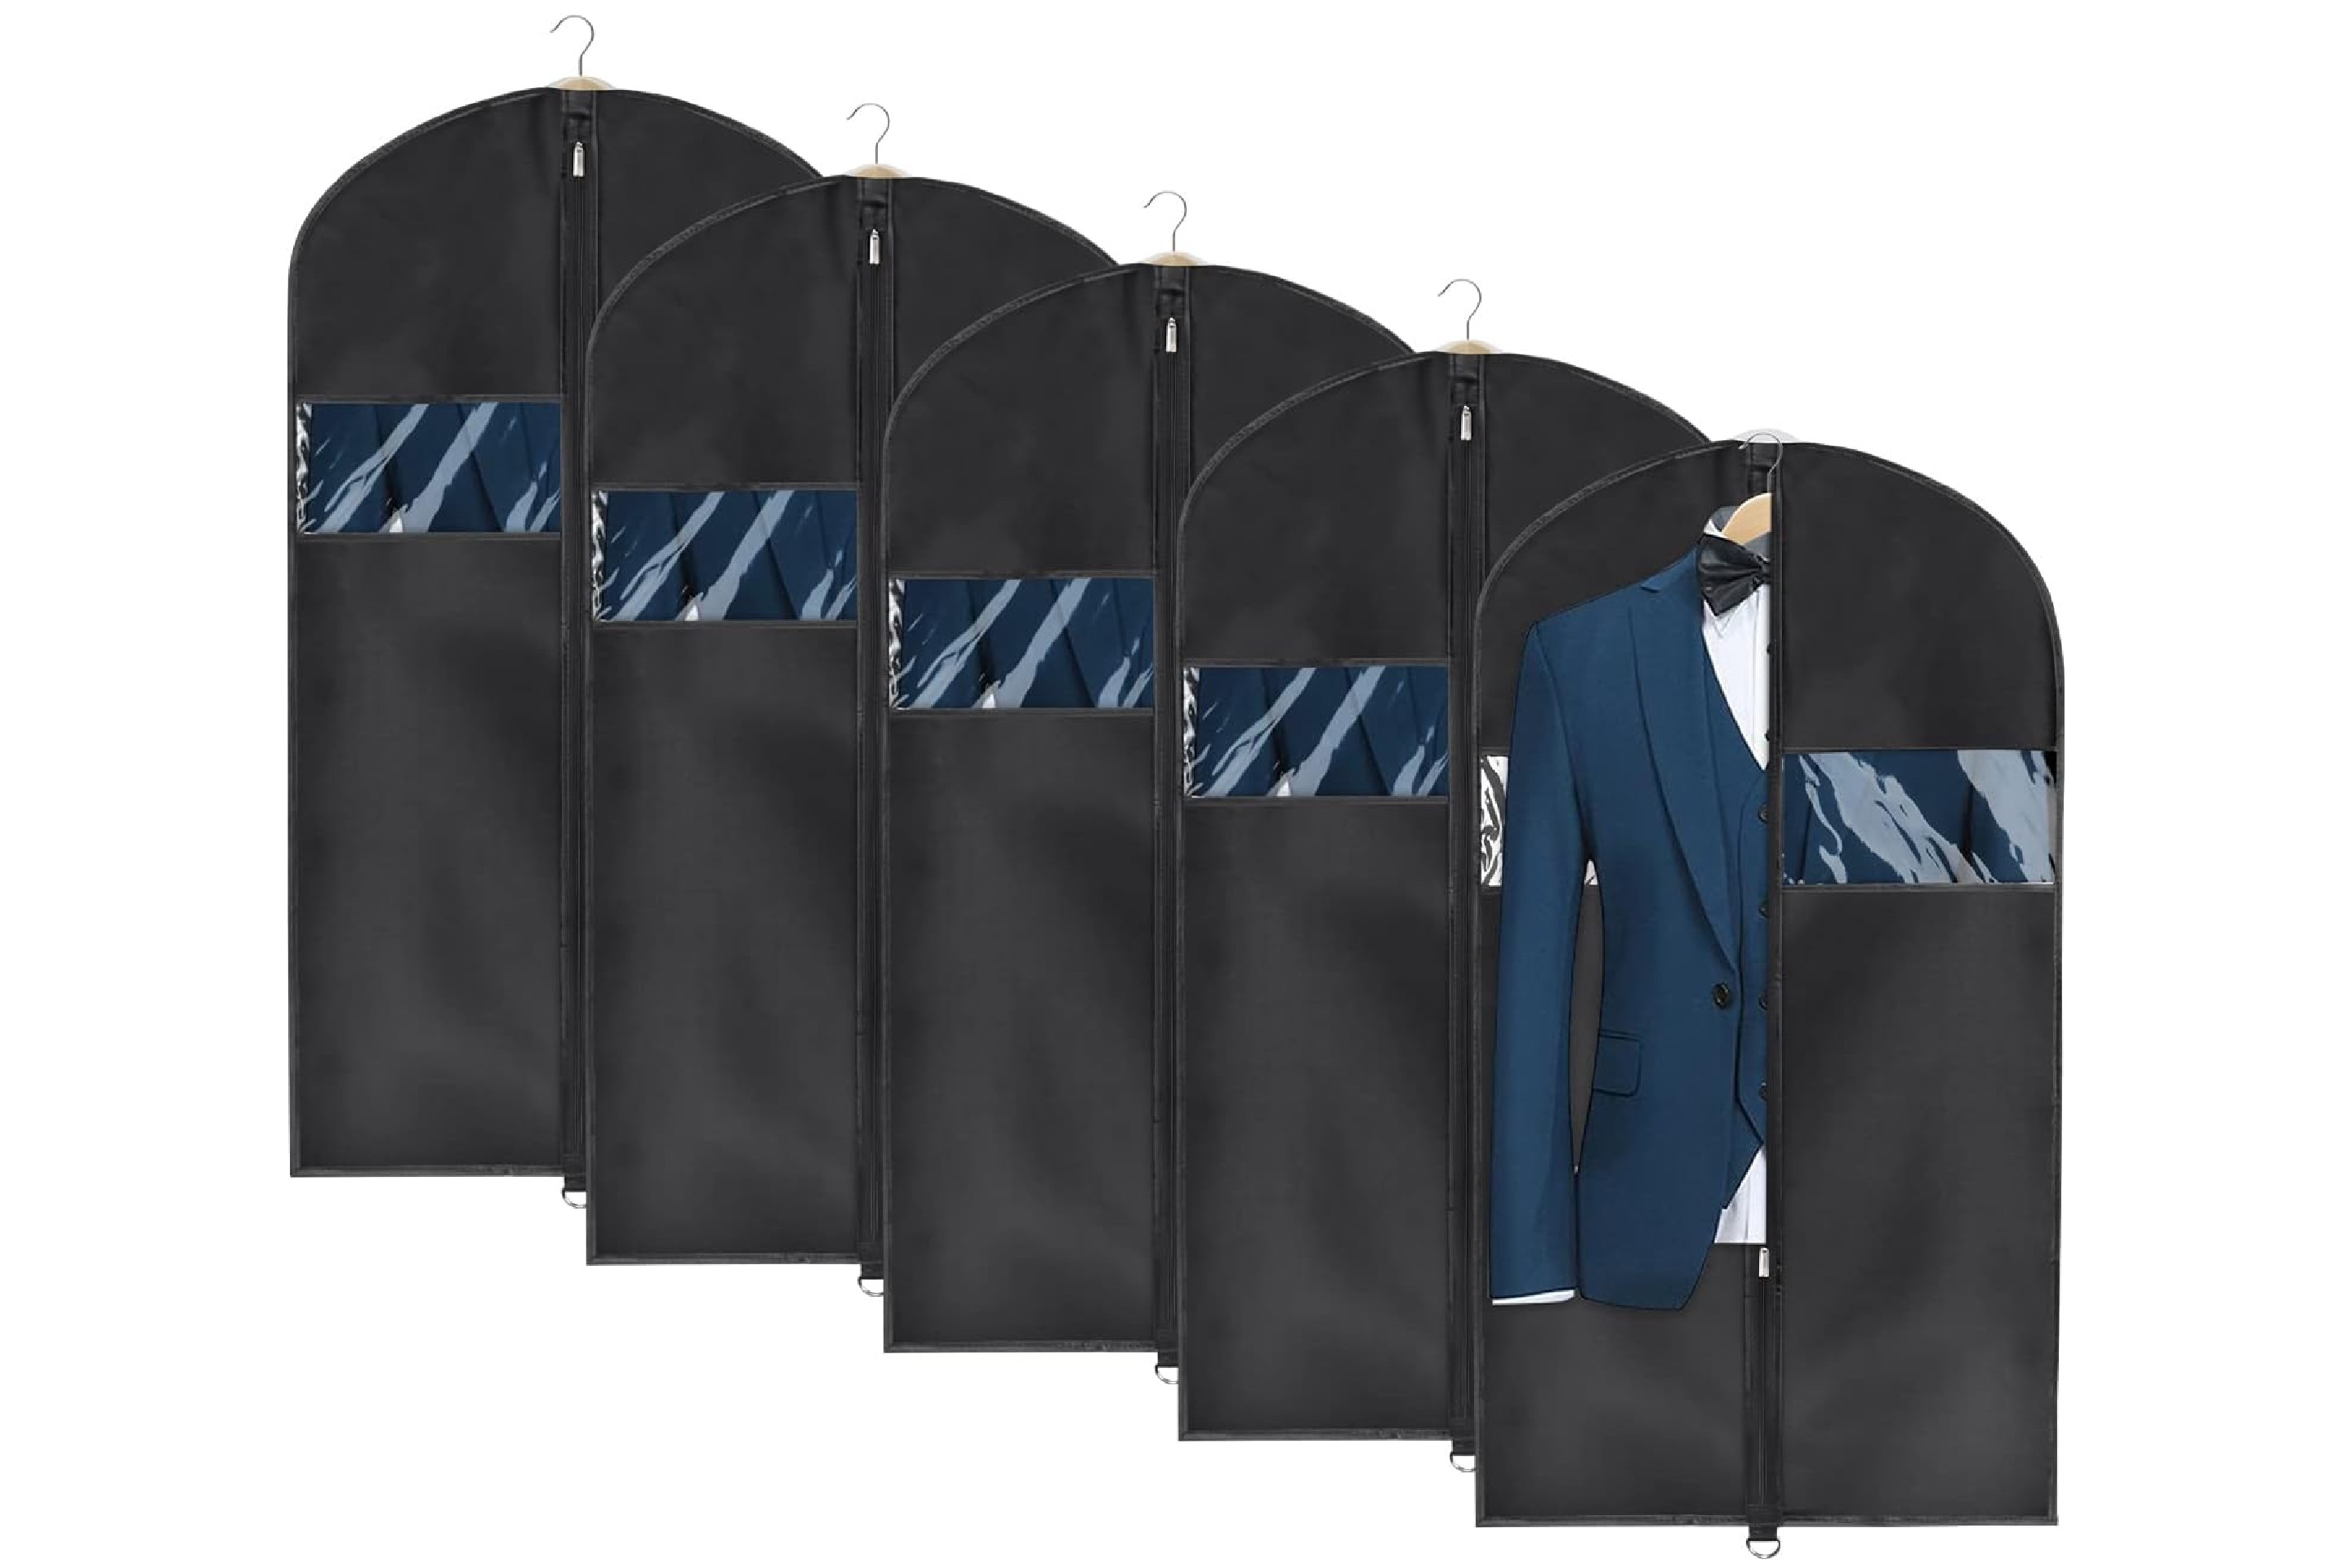 This garment bag keeps my clothes dry and wrinkle free